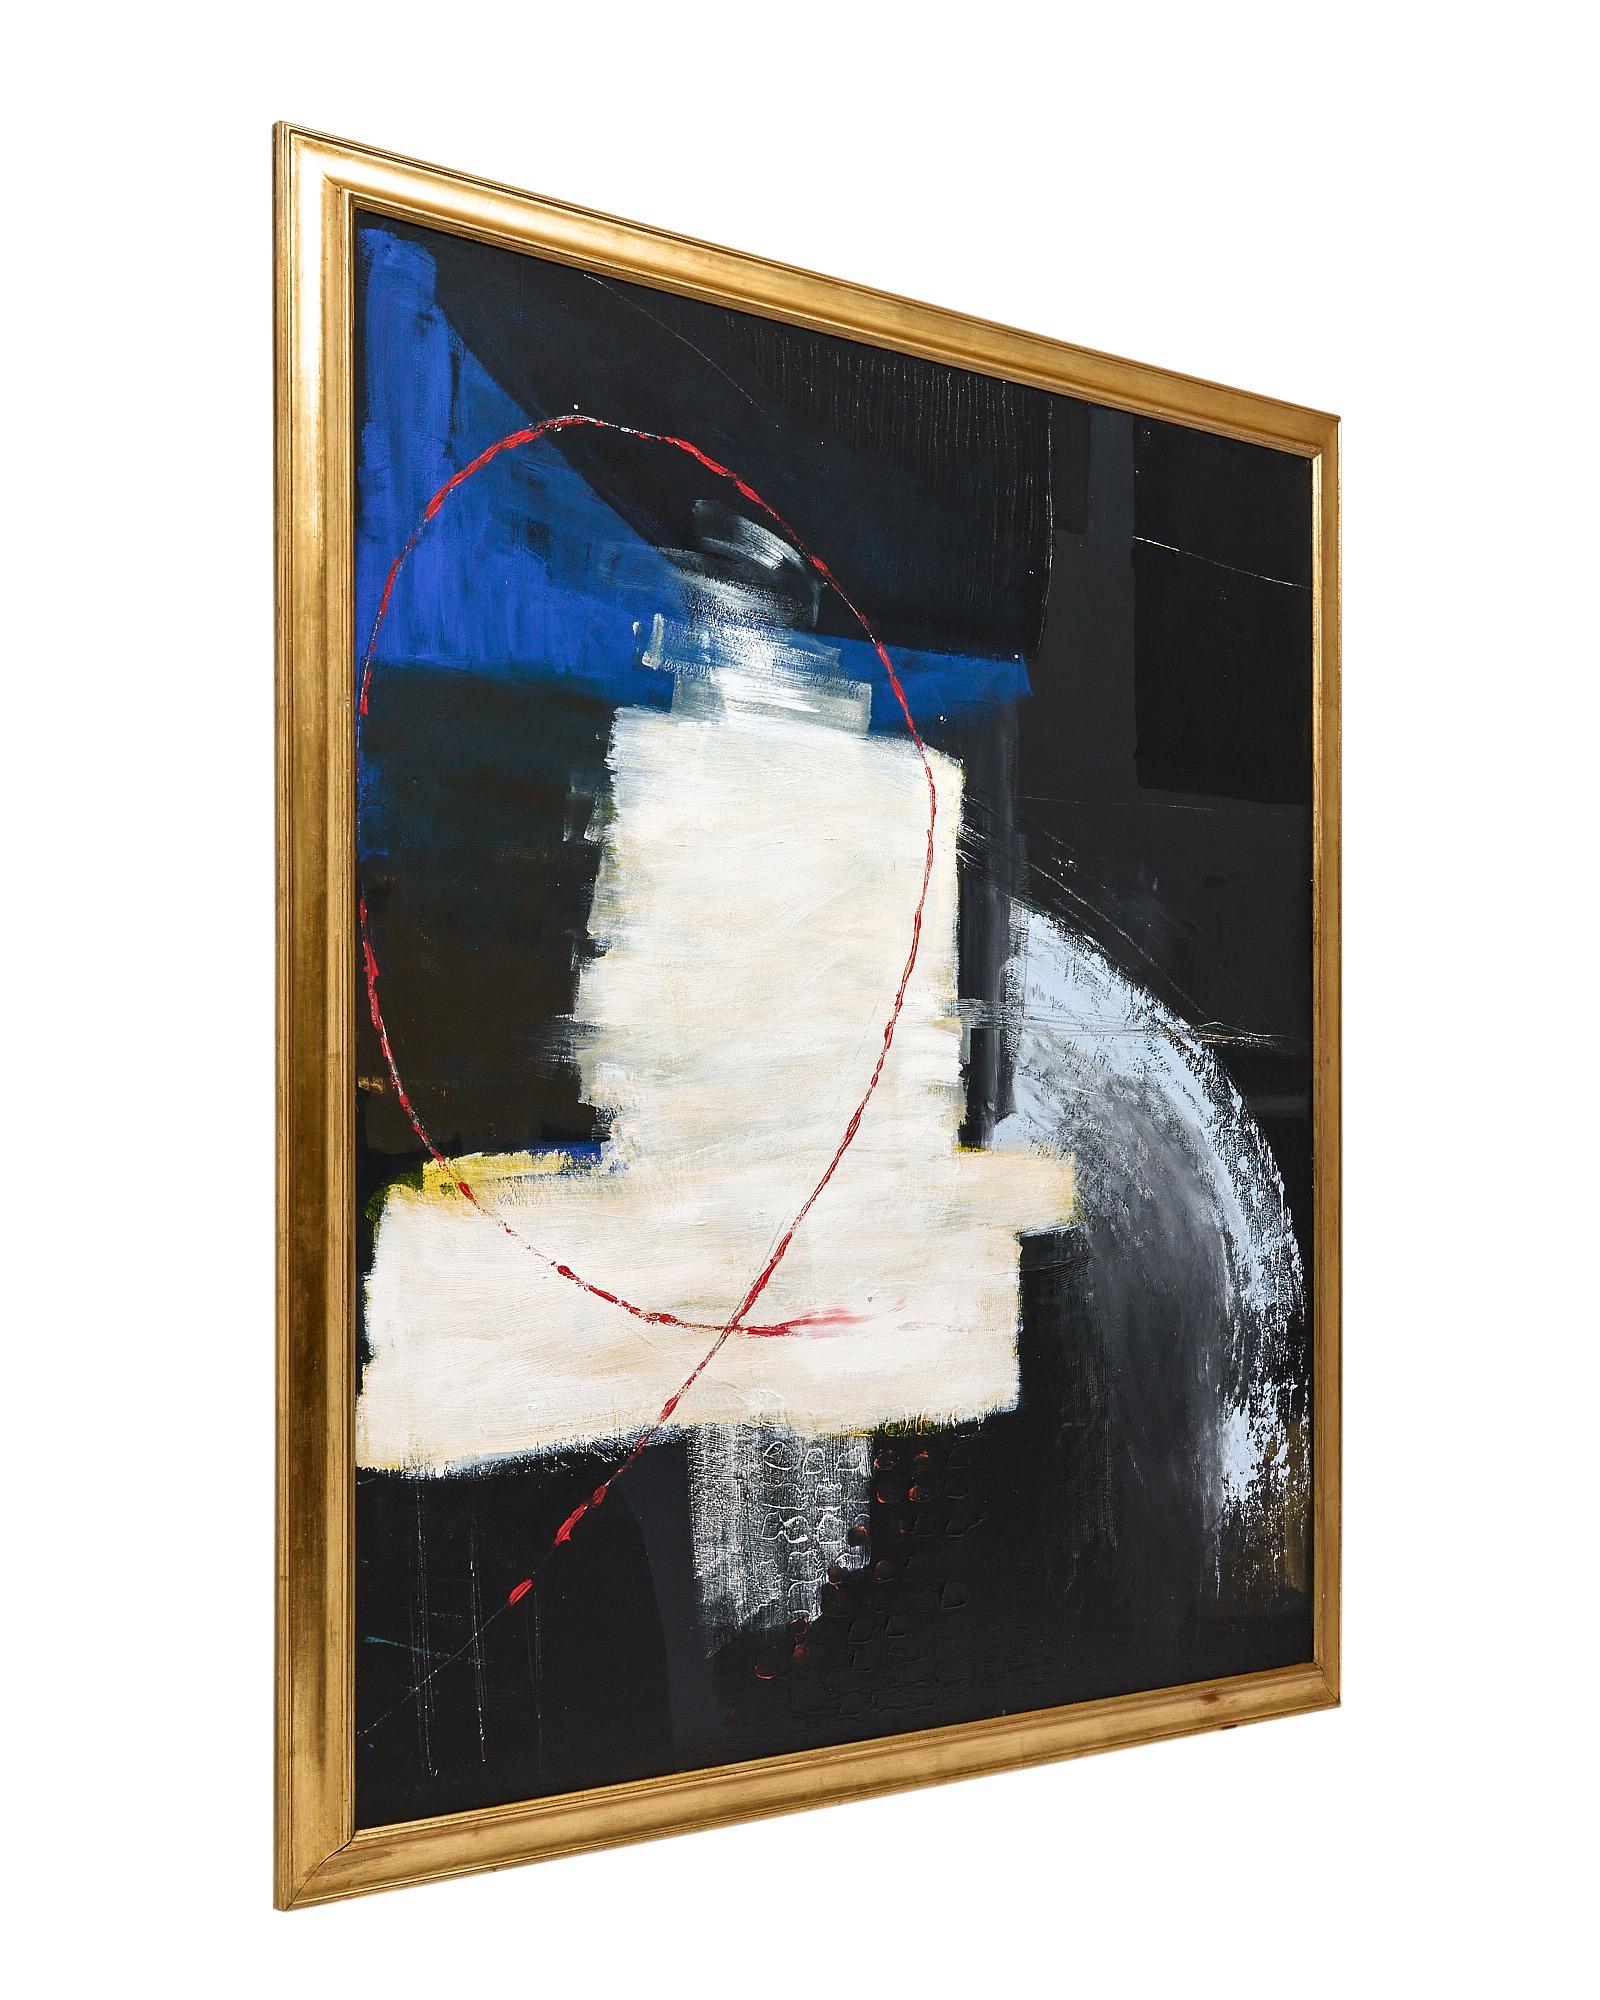 Mixed media Painting on plywood by Danilo Picchiotti. Black and white abstract forms are accented by cobalt blue, yellow, and red detail. It is framed with the original gold-leafed frame.
Danilo Picchiotti was born in Rome in 1933. He is a